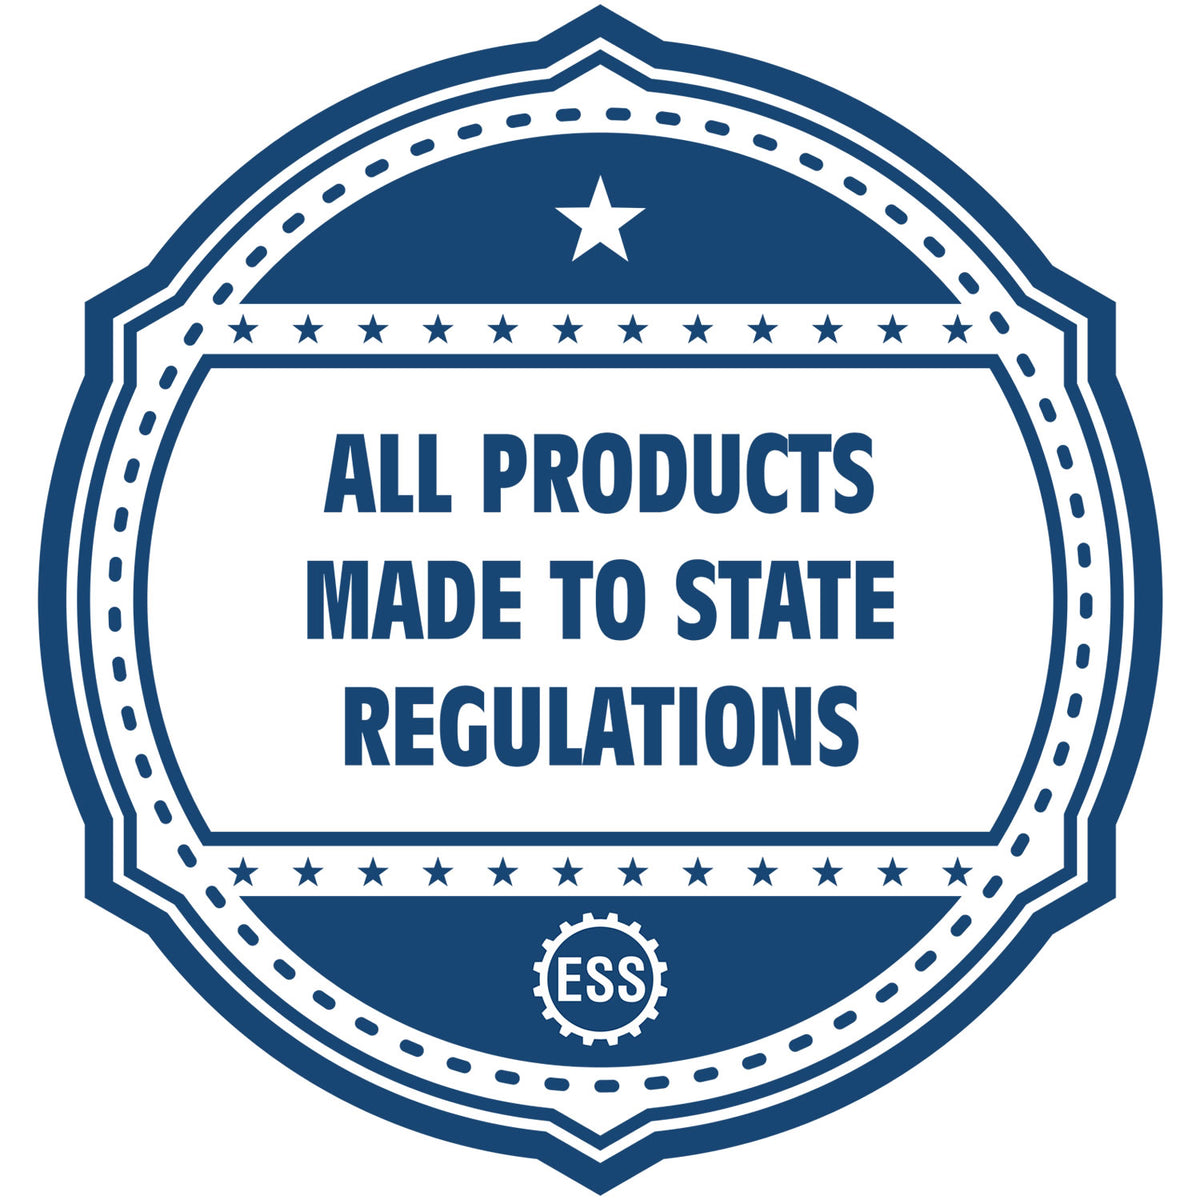 A blue icon or badge for the Hybrid Minnesota Landscape Architect Seal showing that this product is made in compliance with state regulations.